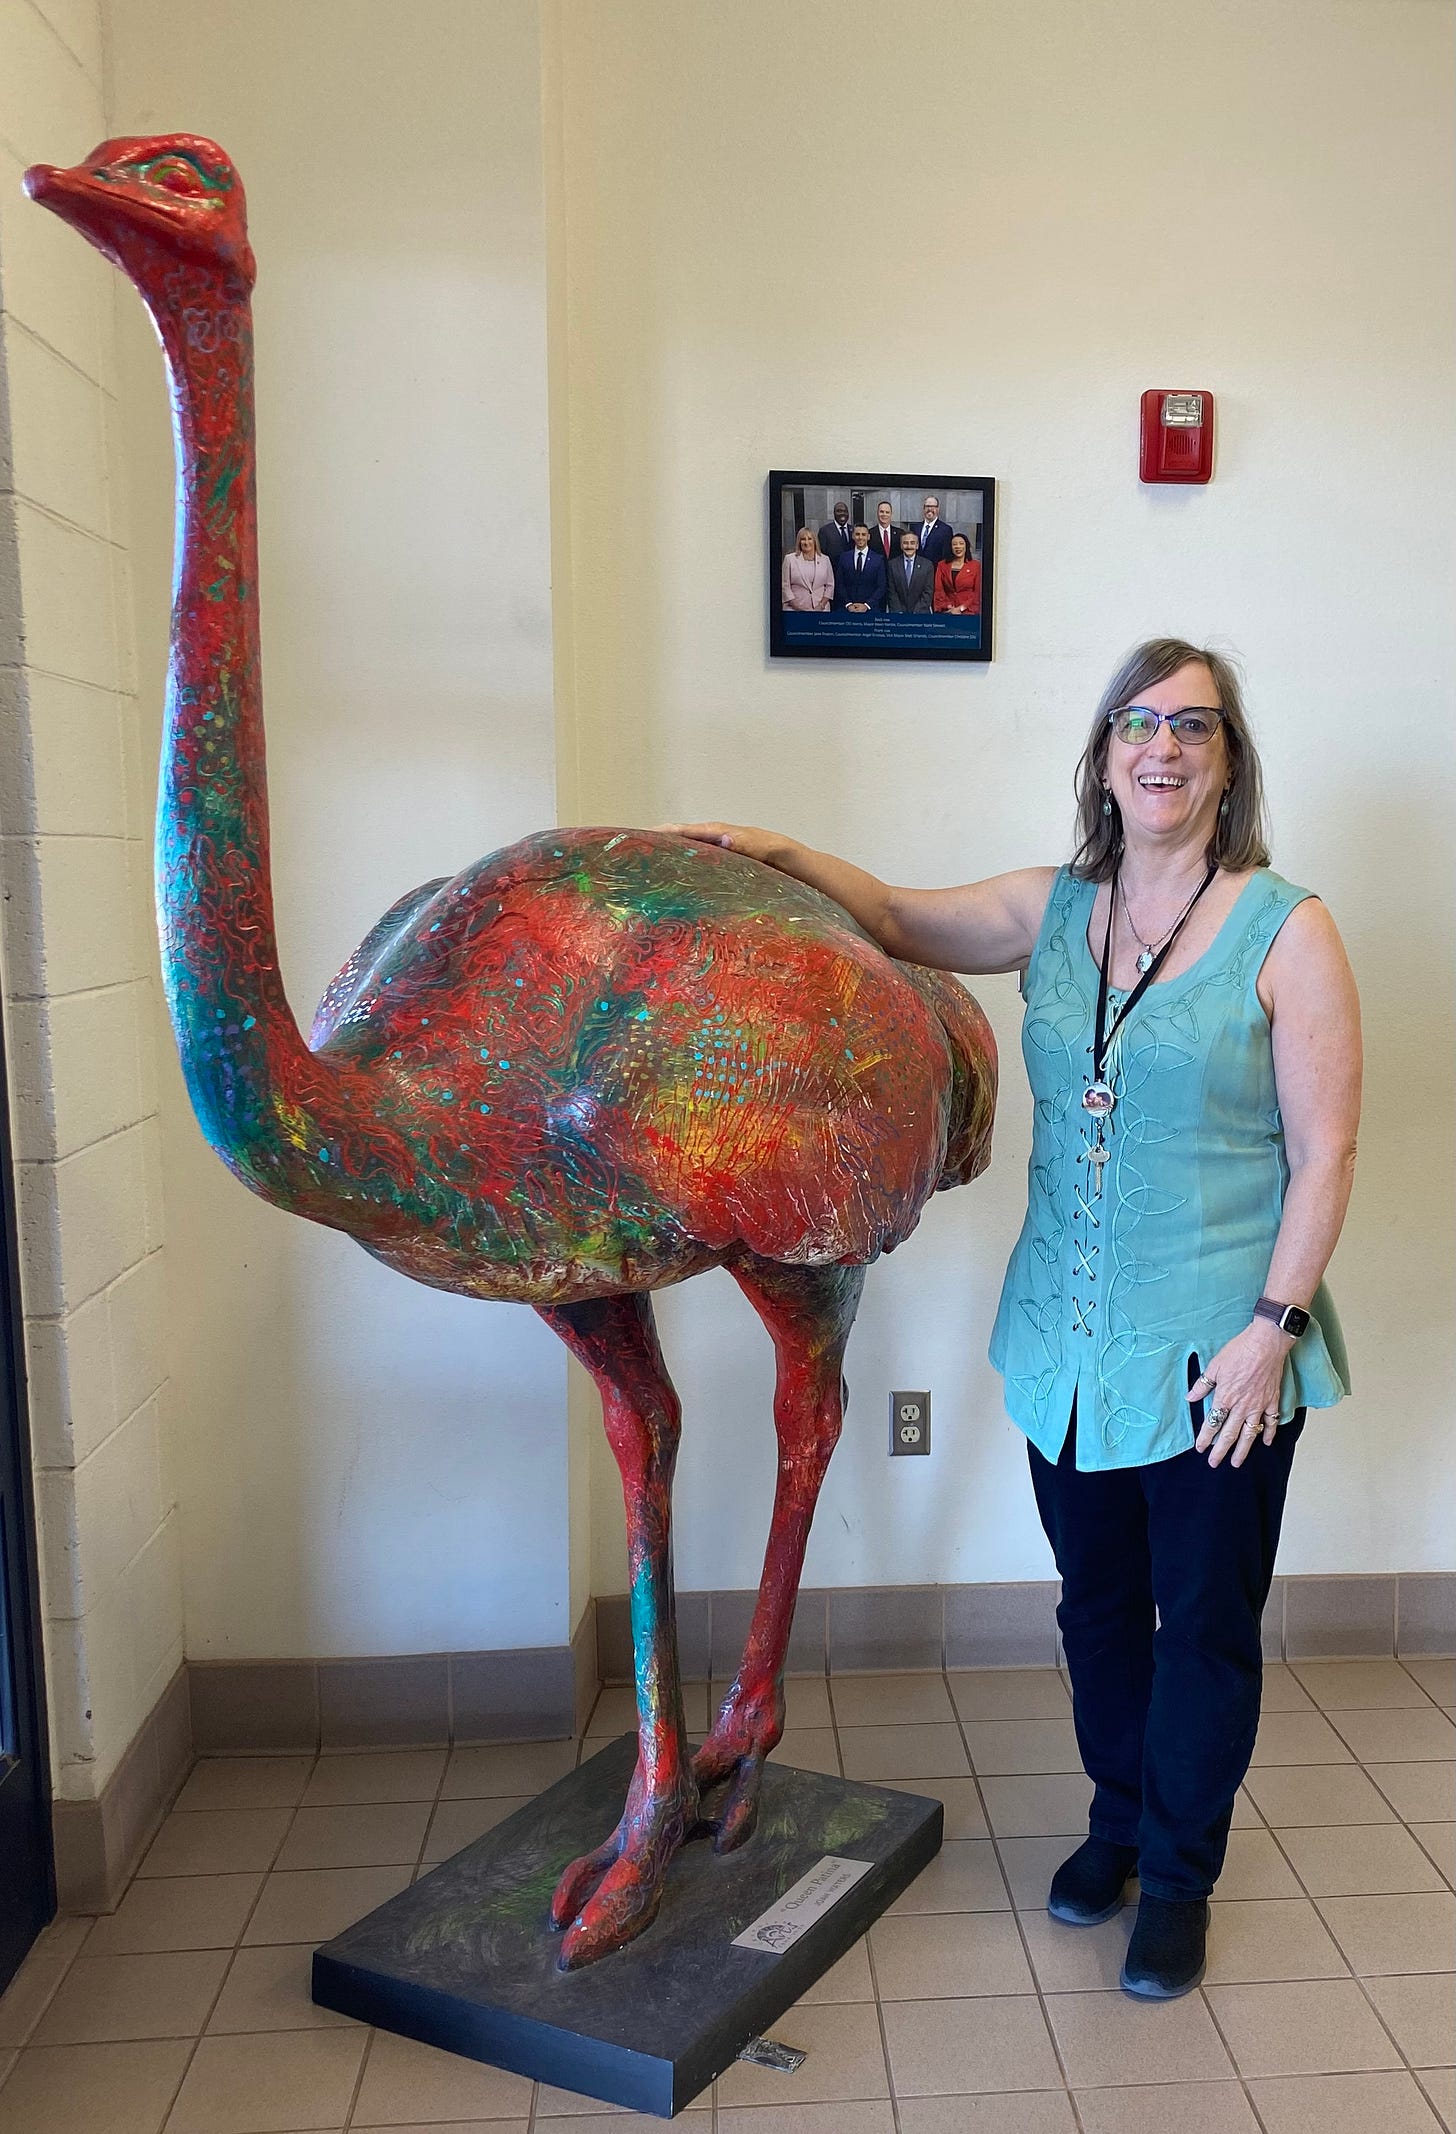 Sharon standing beside a coloful ostrich stature inside the Chandler Library Basha Branch.